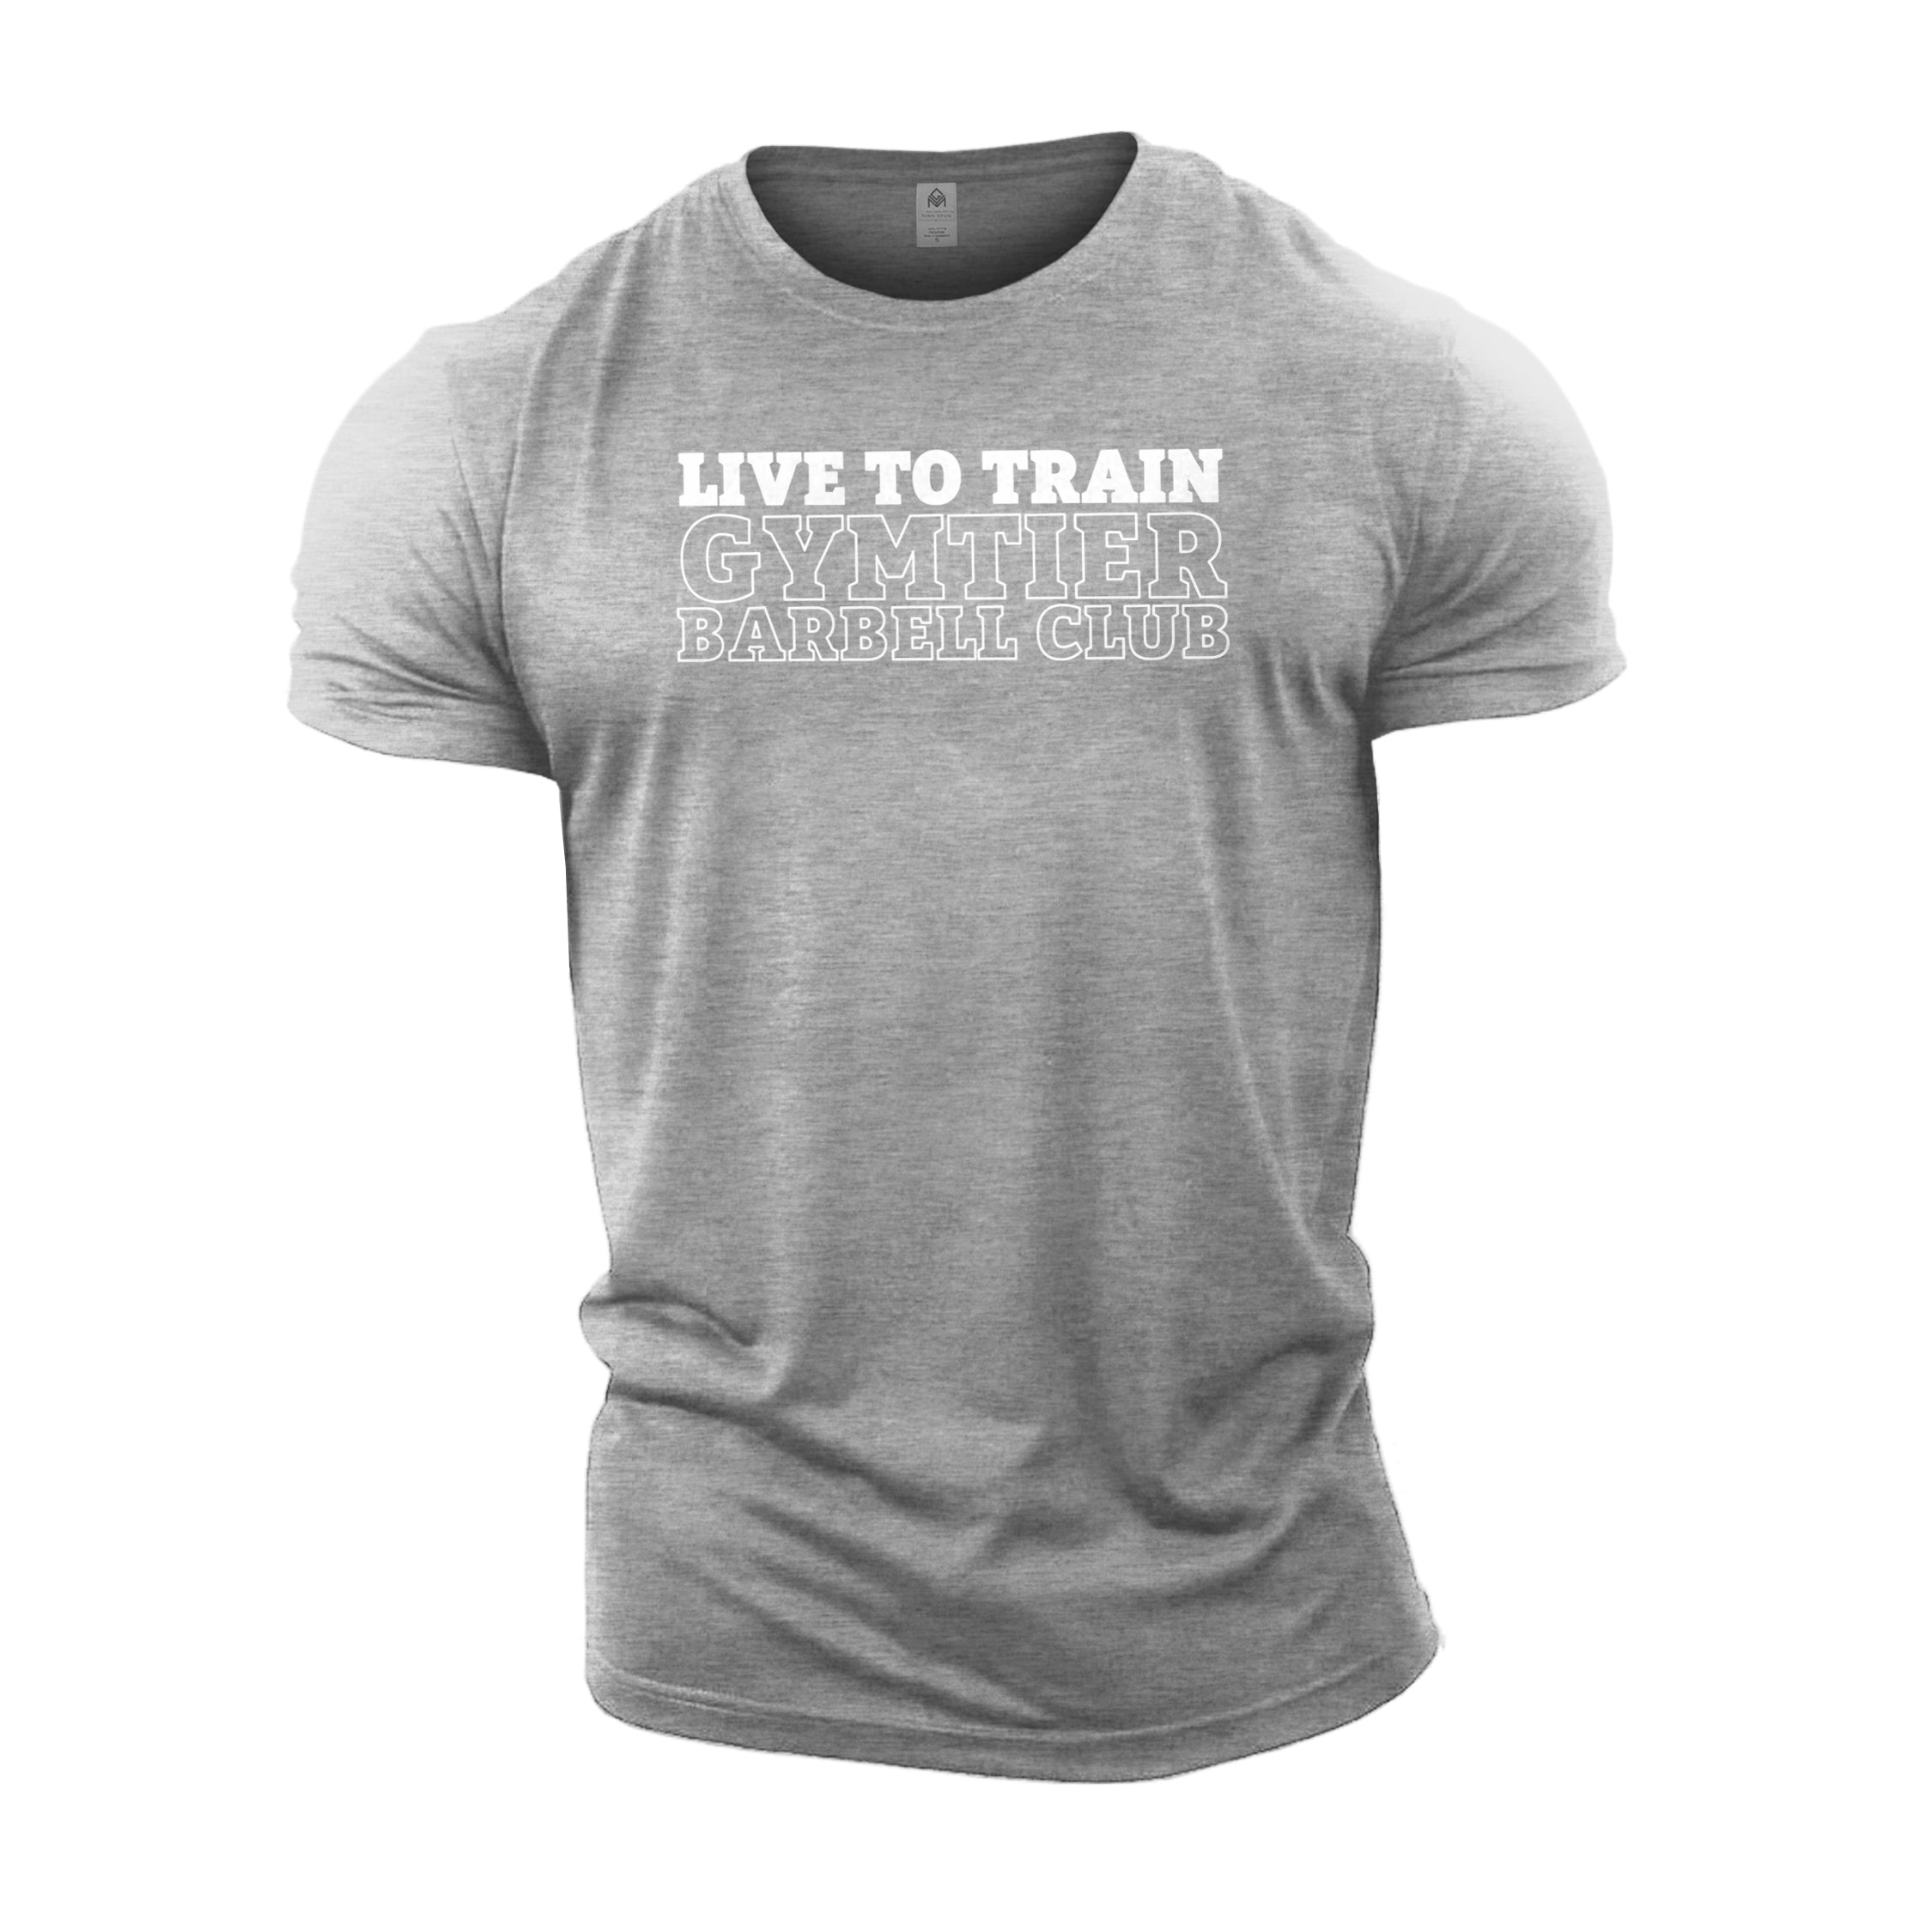 Gymtier Barbell Club - Live To Train Chest - Gym T-Shirt